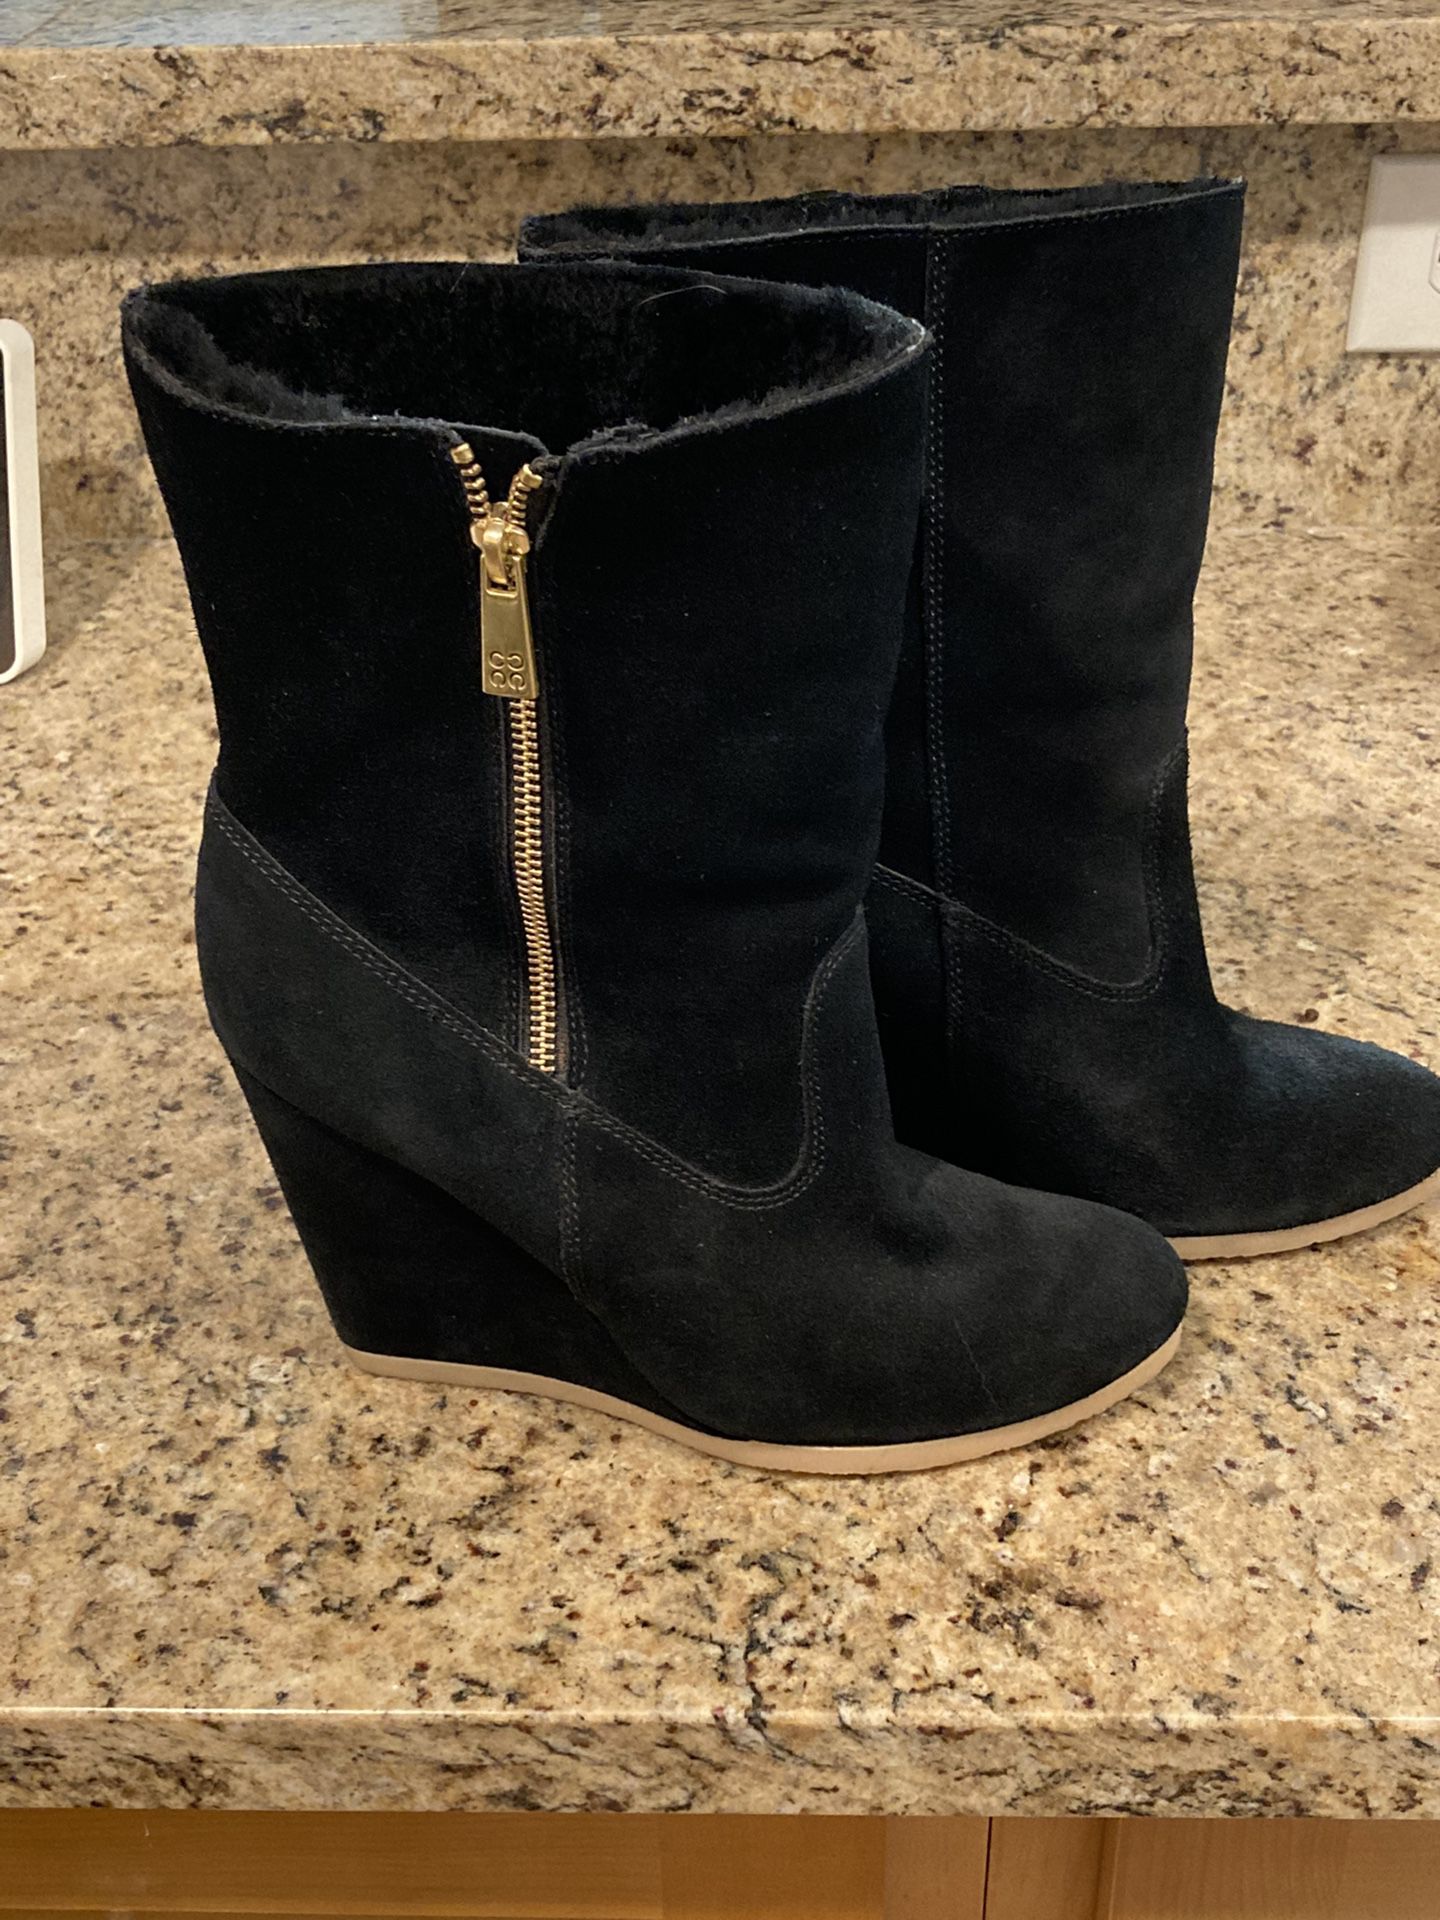 Coach ankle boots Size 8